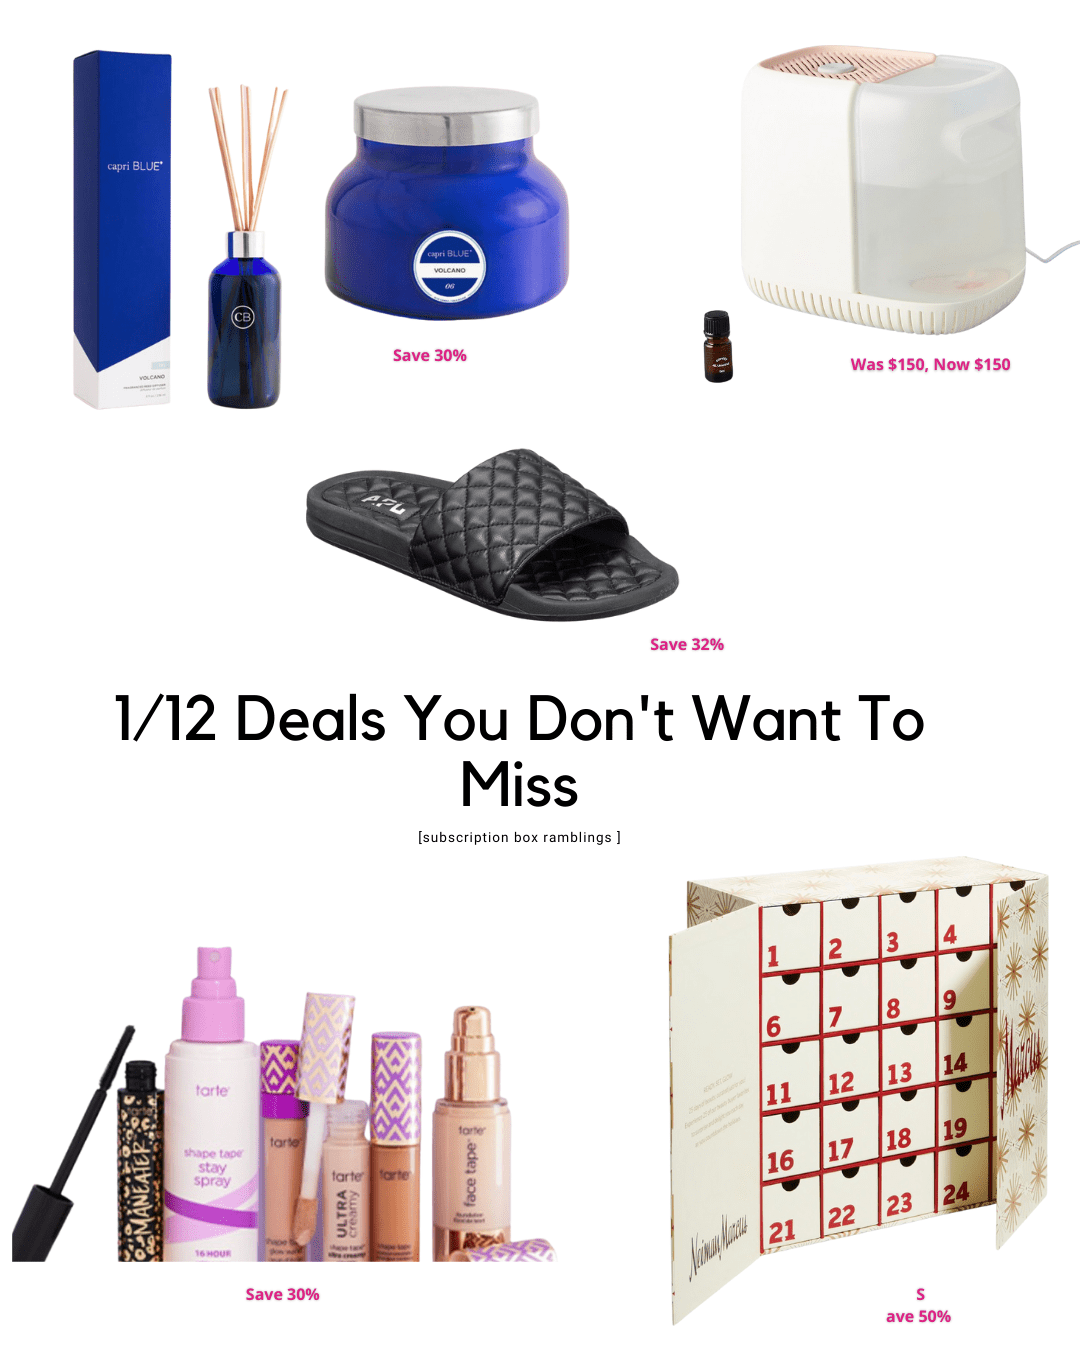 Deals You Don’t Want to Miss – 1/12